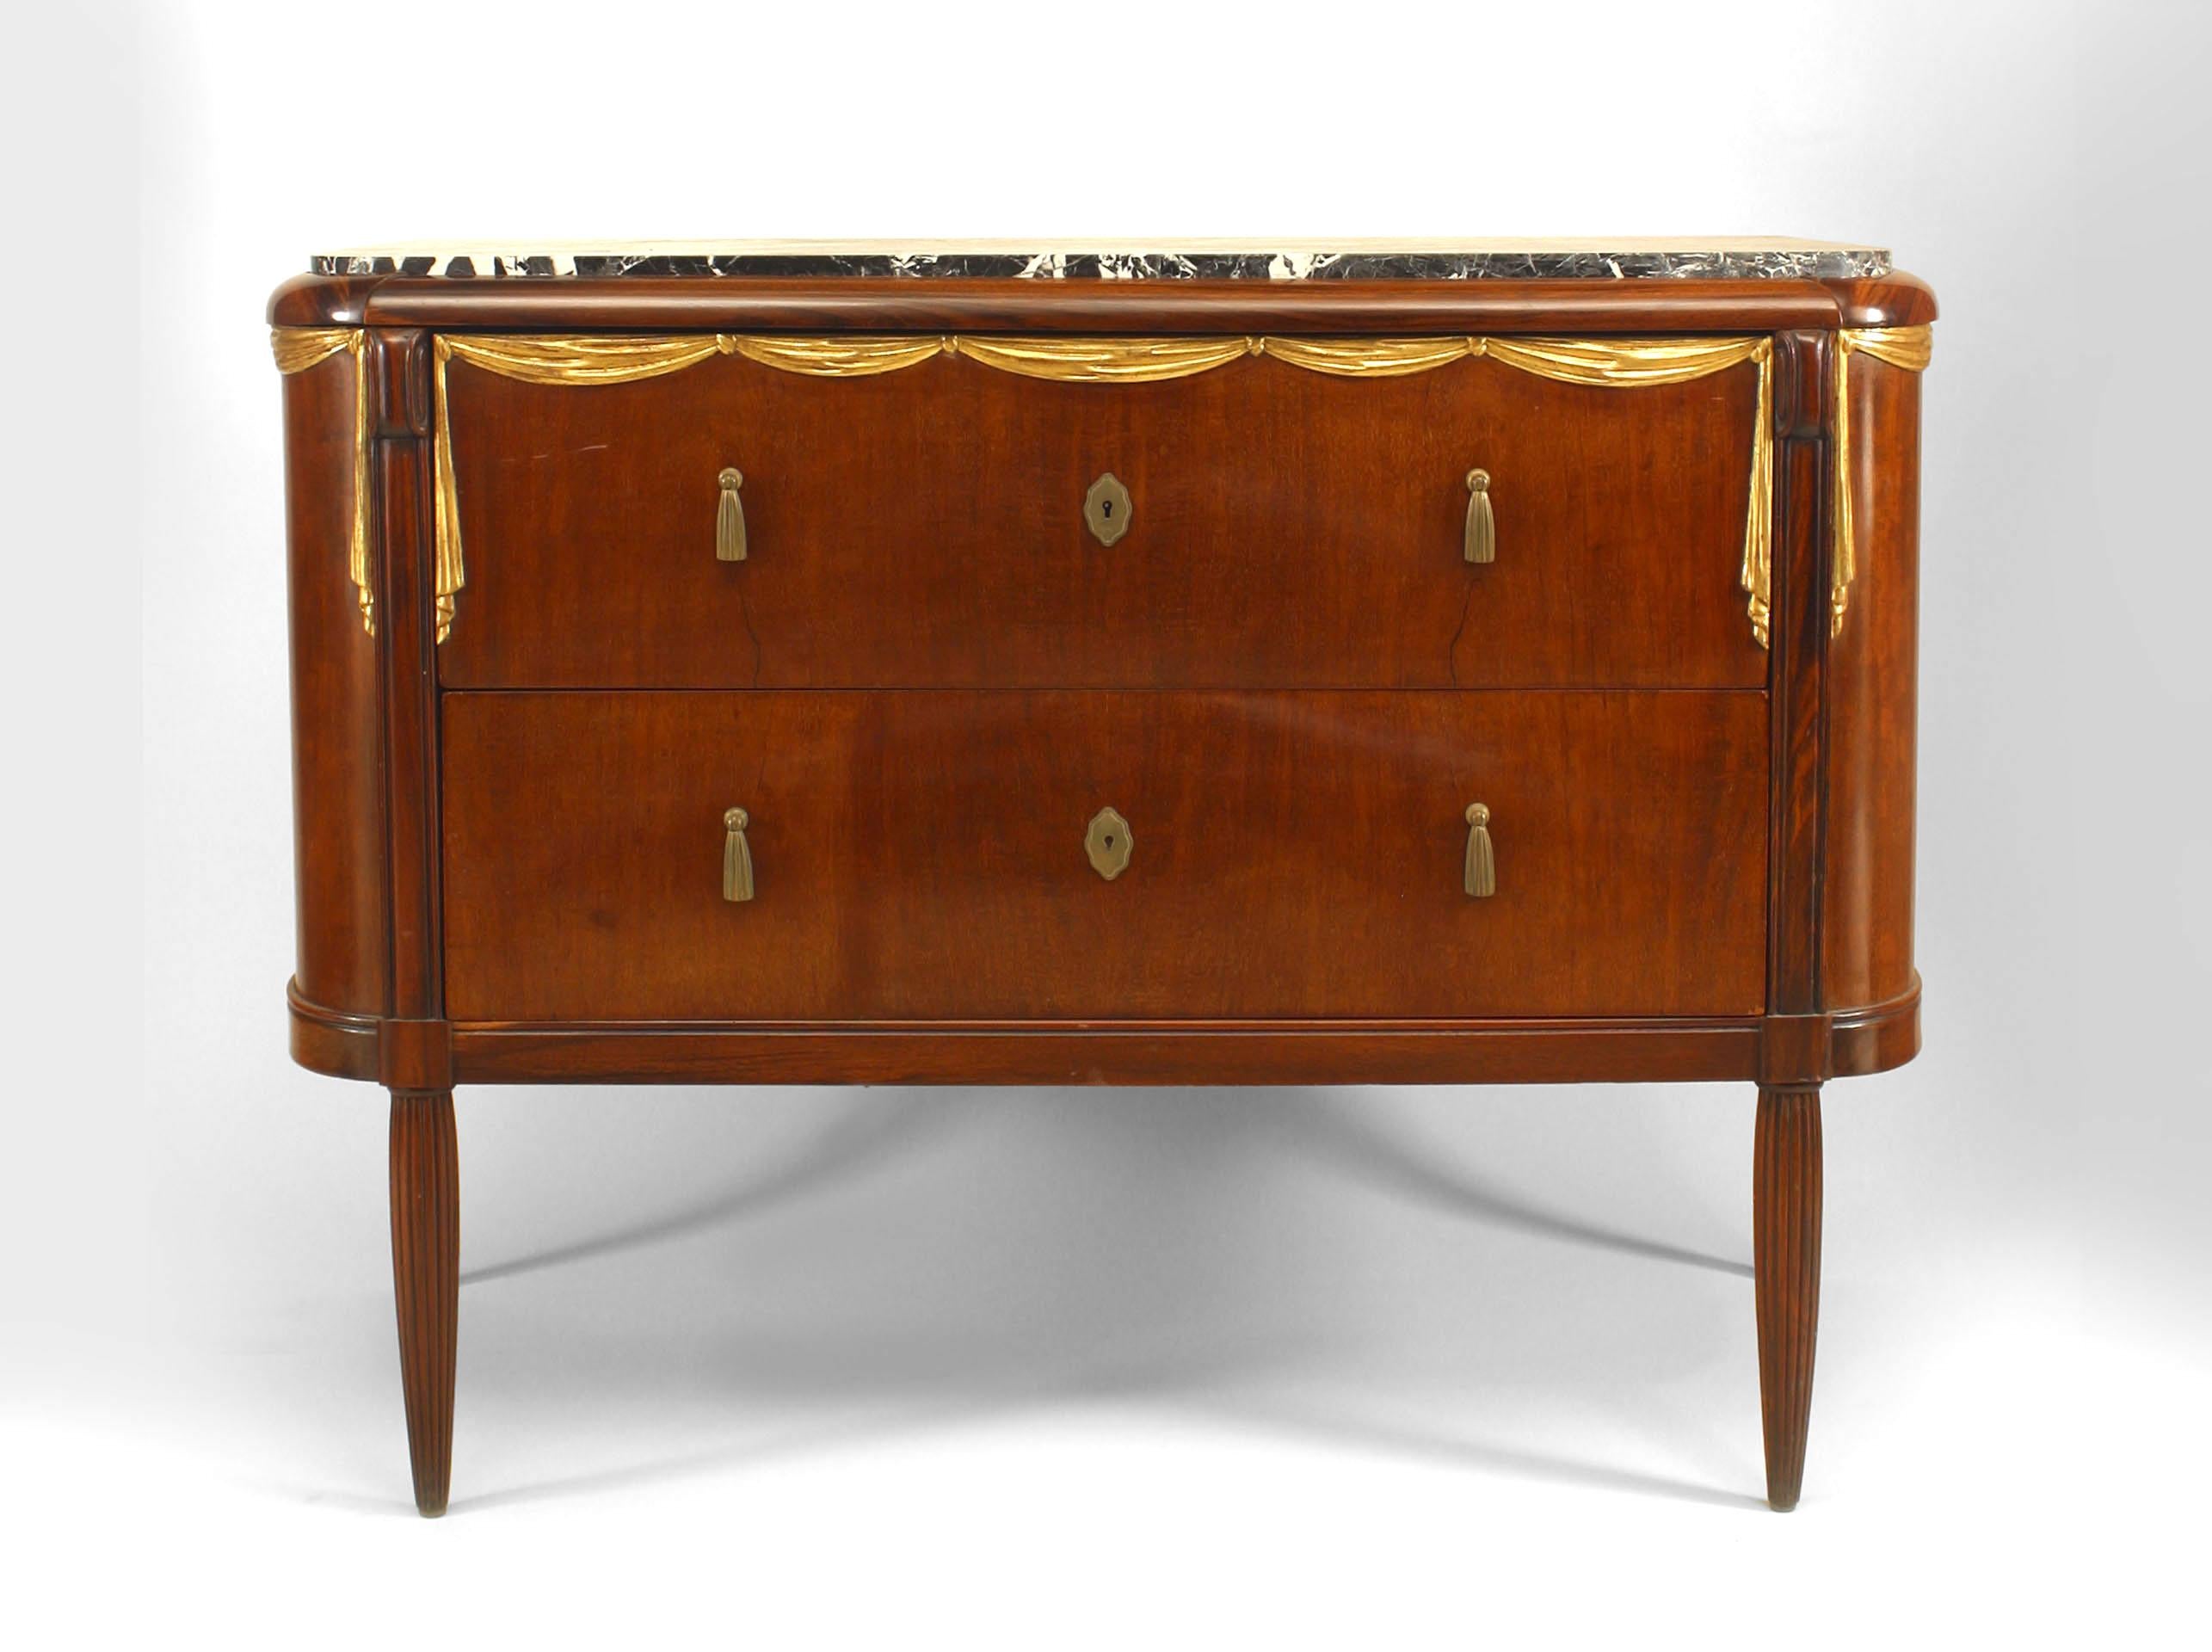 French Art Deco parcel gilt, mahogany & rosewood commode with inset black marble top over a swag carved frieze with 2 long drawers (attributed to MAURICE DUFRENE)
